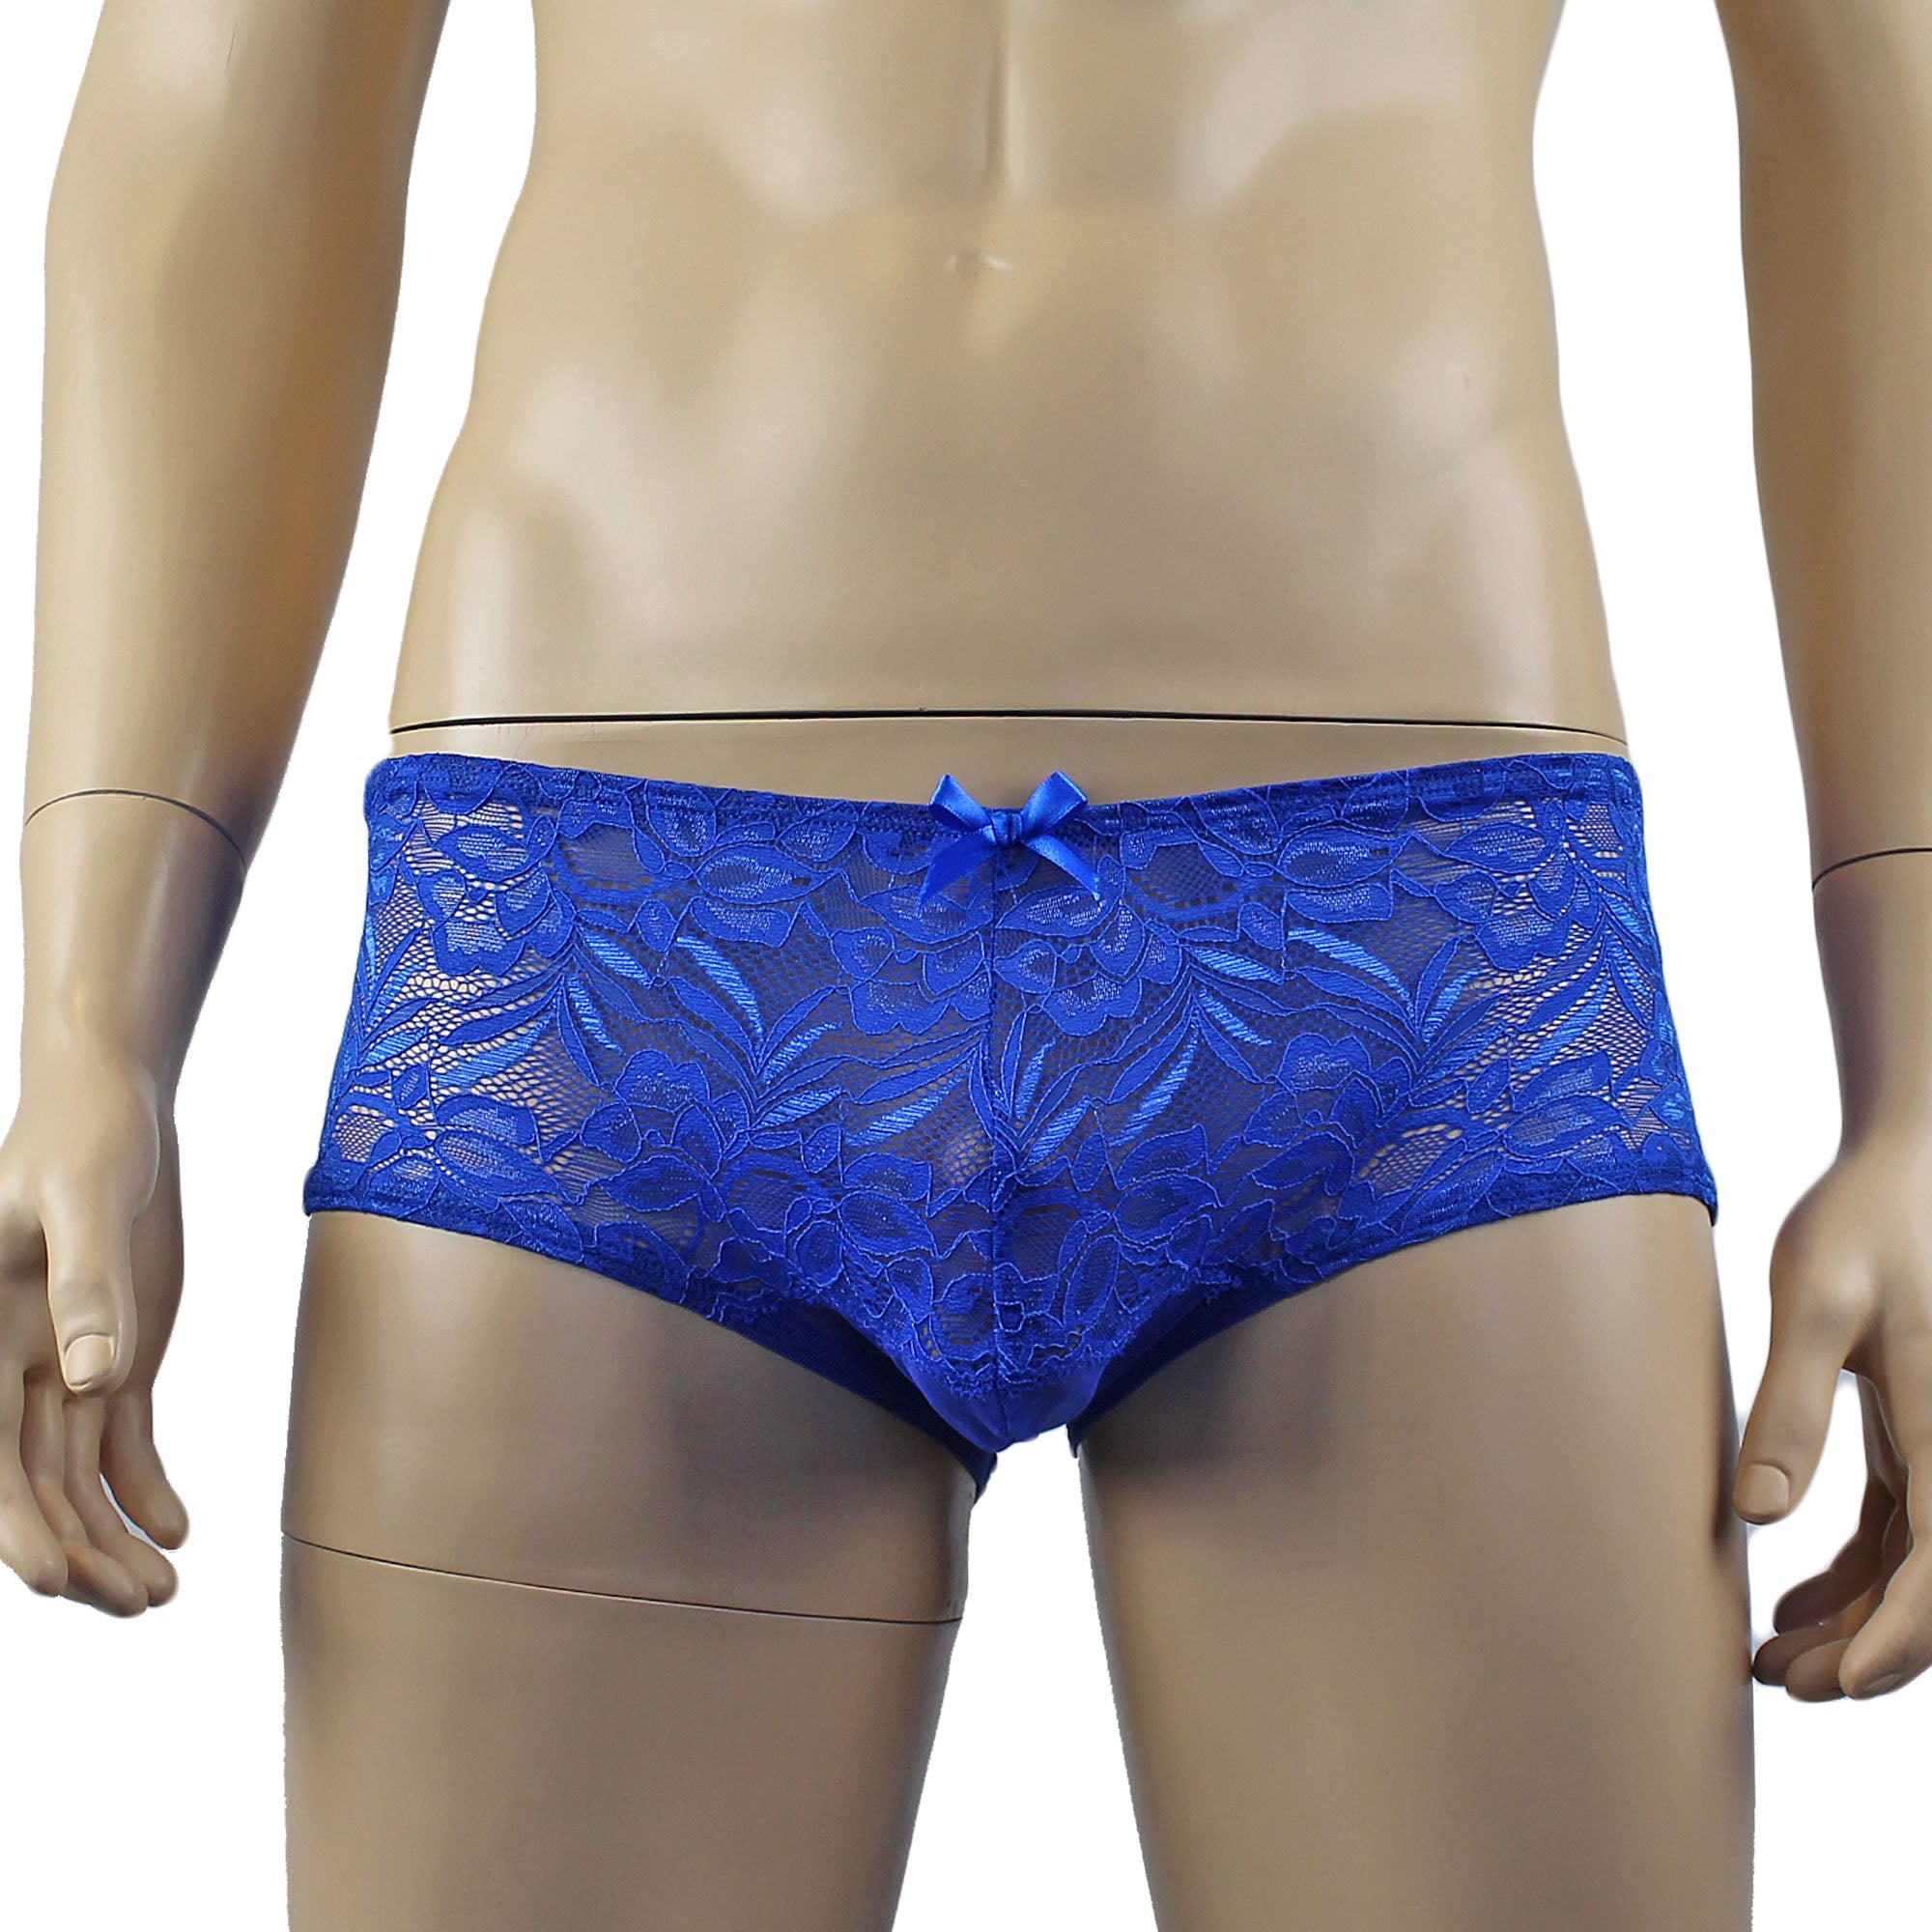 Mens Kristy Lingerie Sexy Lace and Mesh Panty Brief Blue